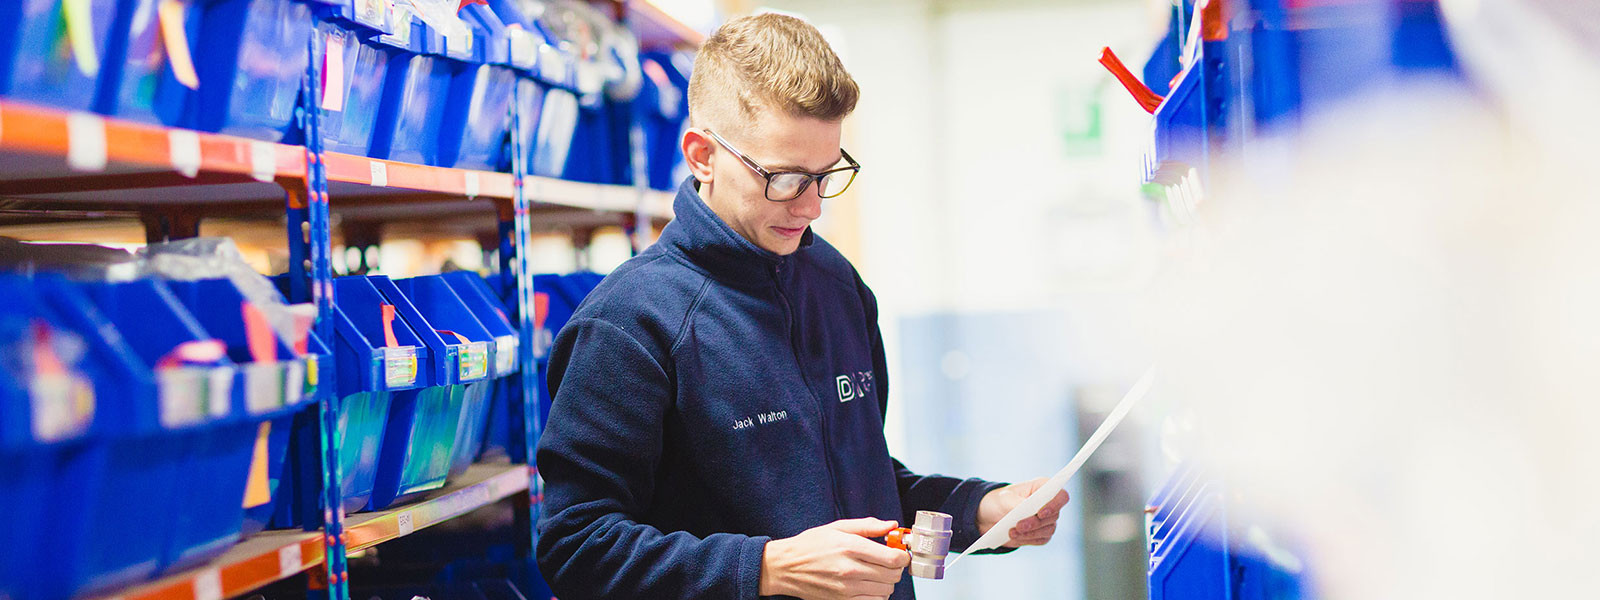 A day in the life of… an engineering apprentice